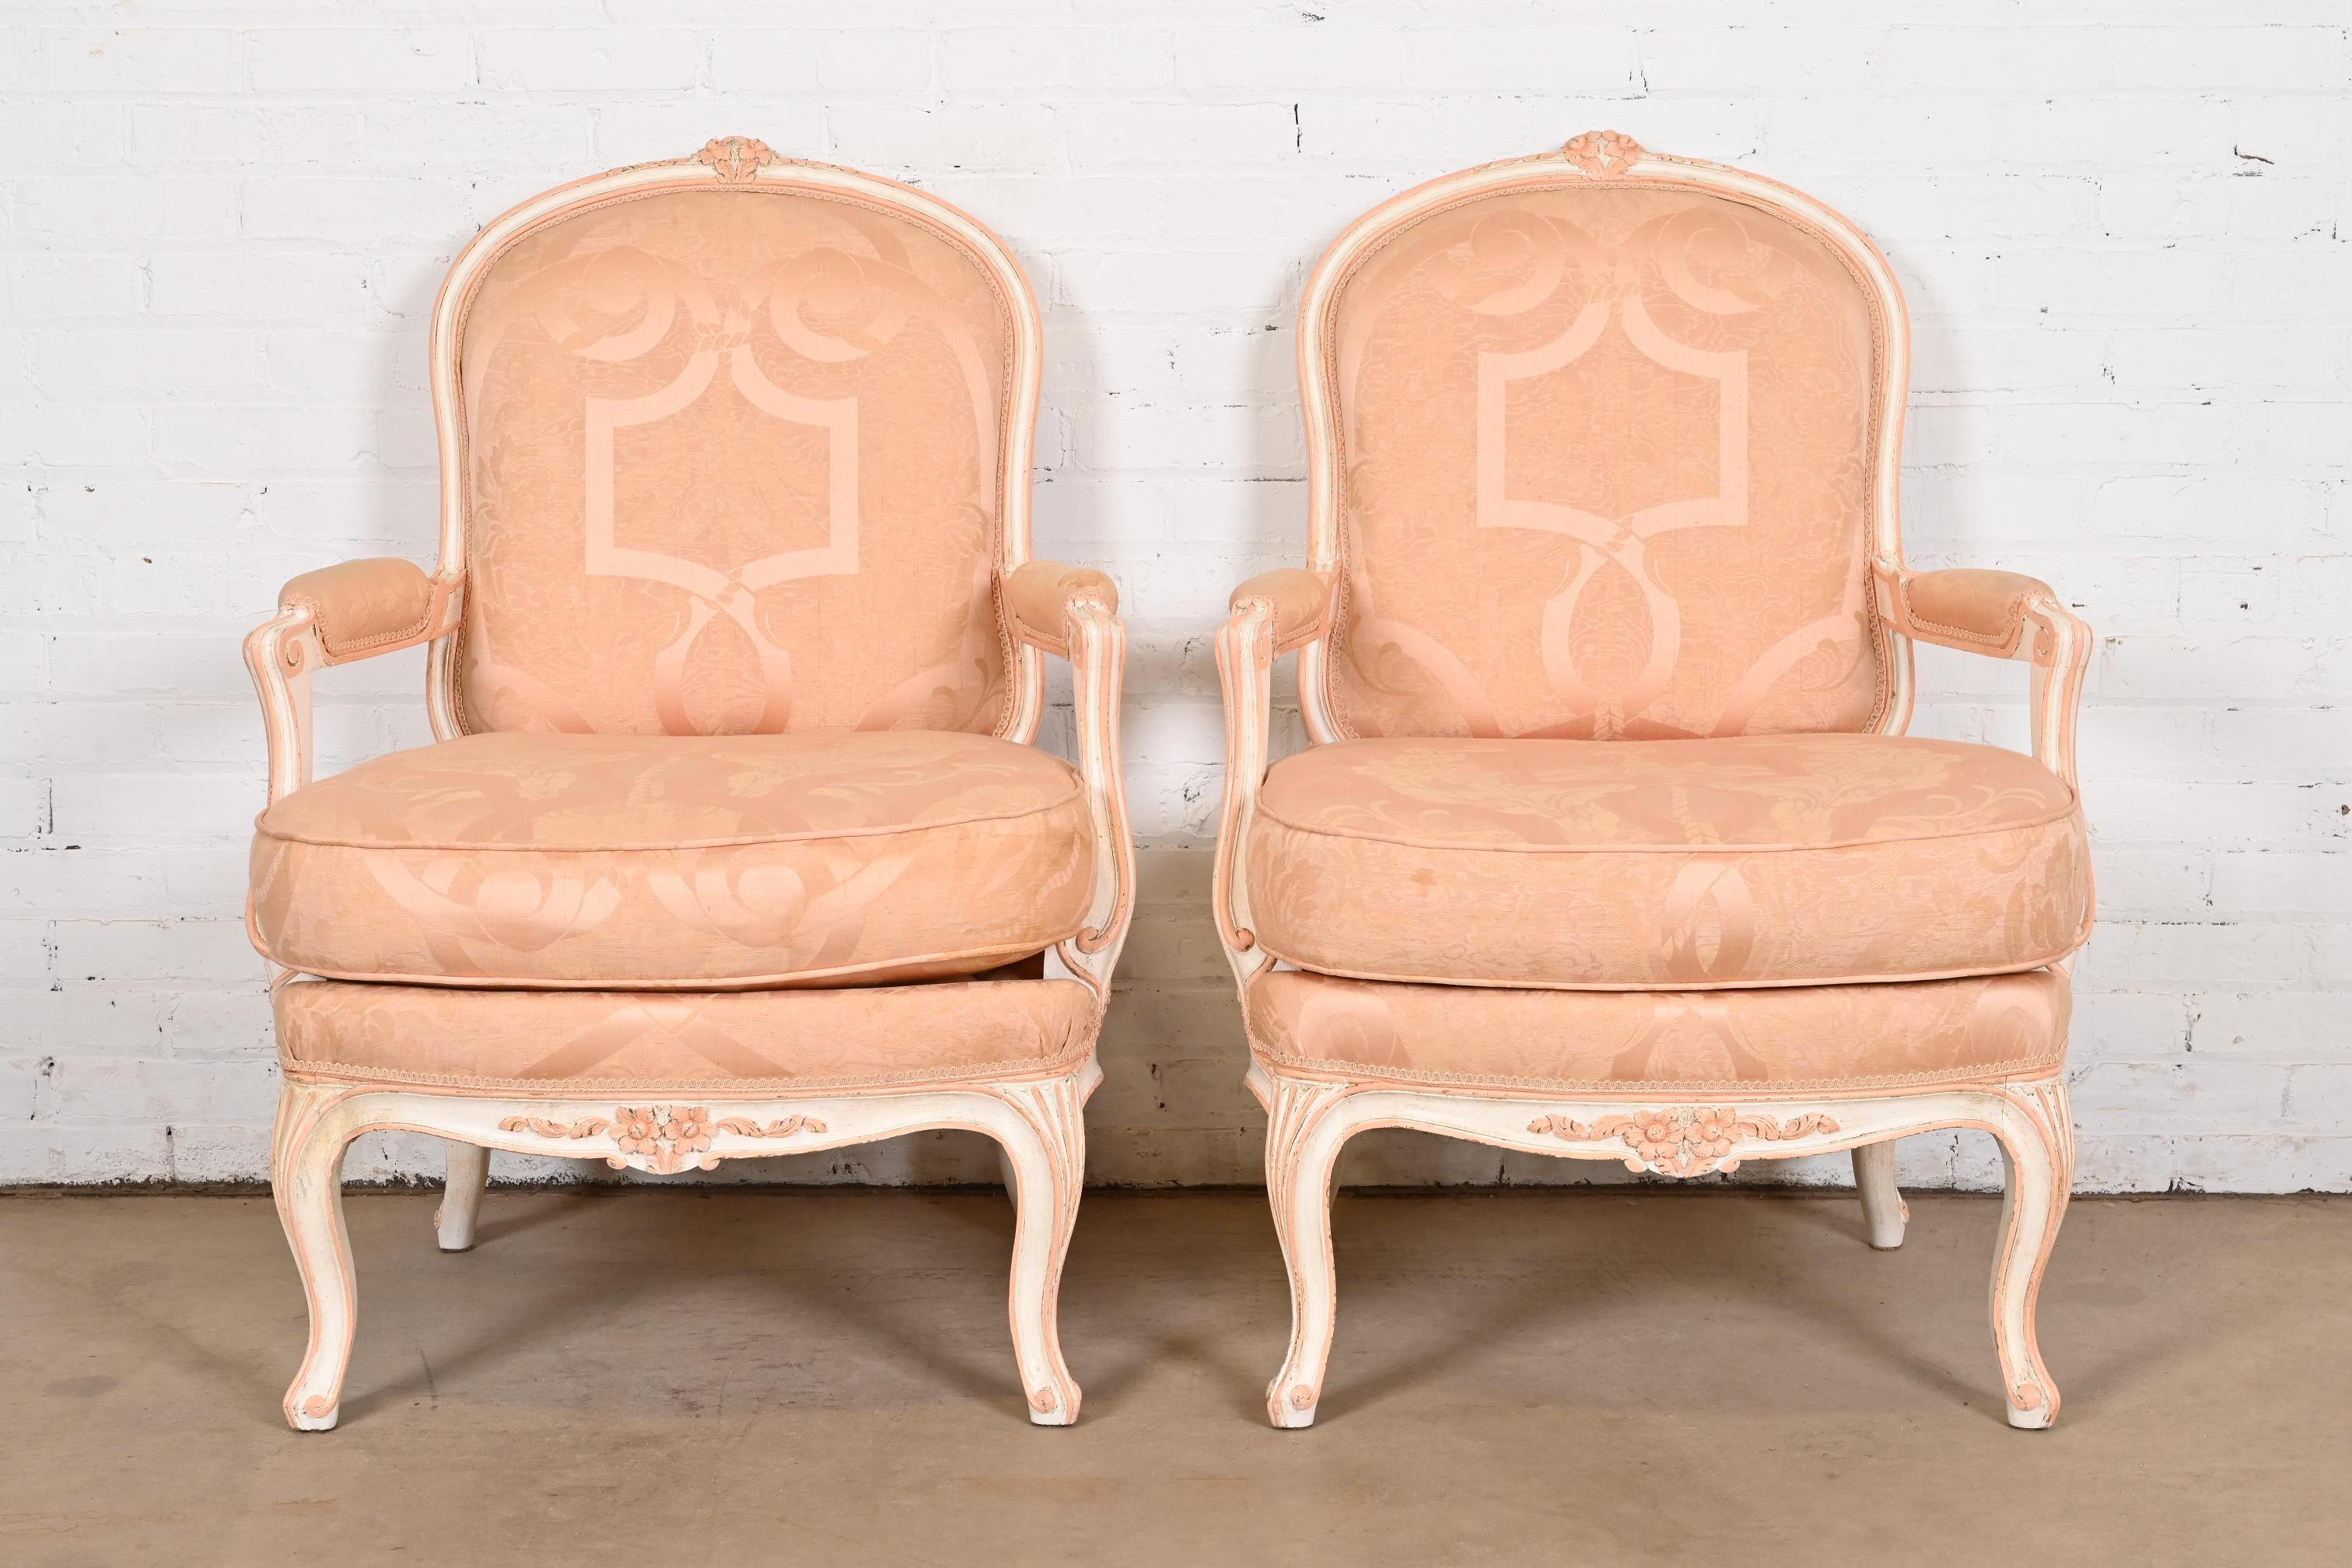 20th Century French Provincial Louis XV Carved Painted Walnut Fauteuils, Pair For Sale